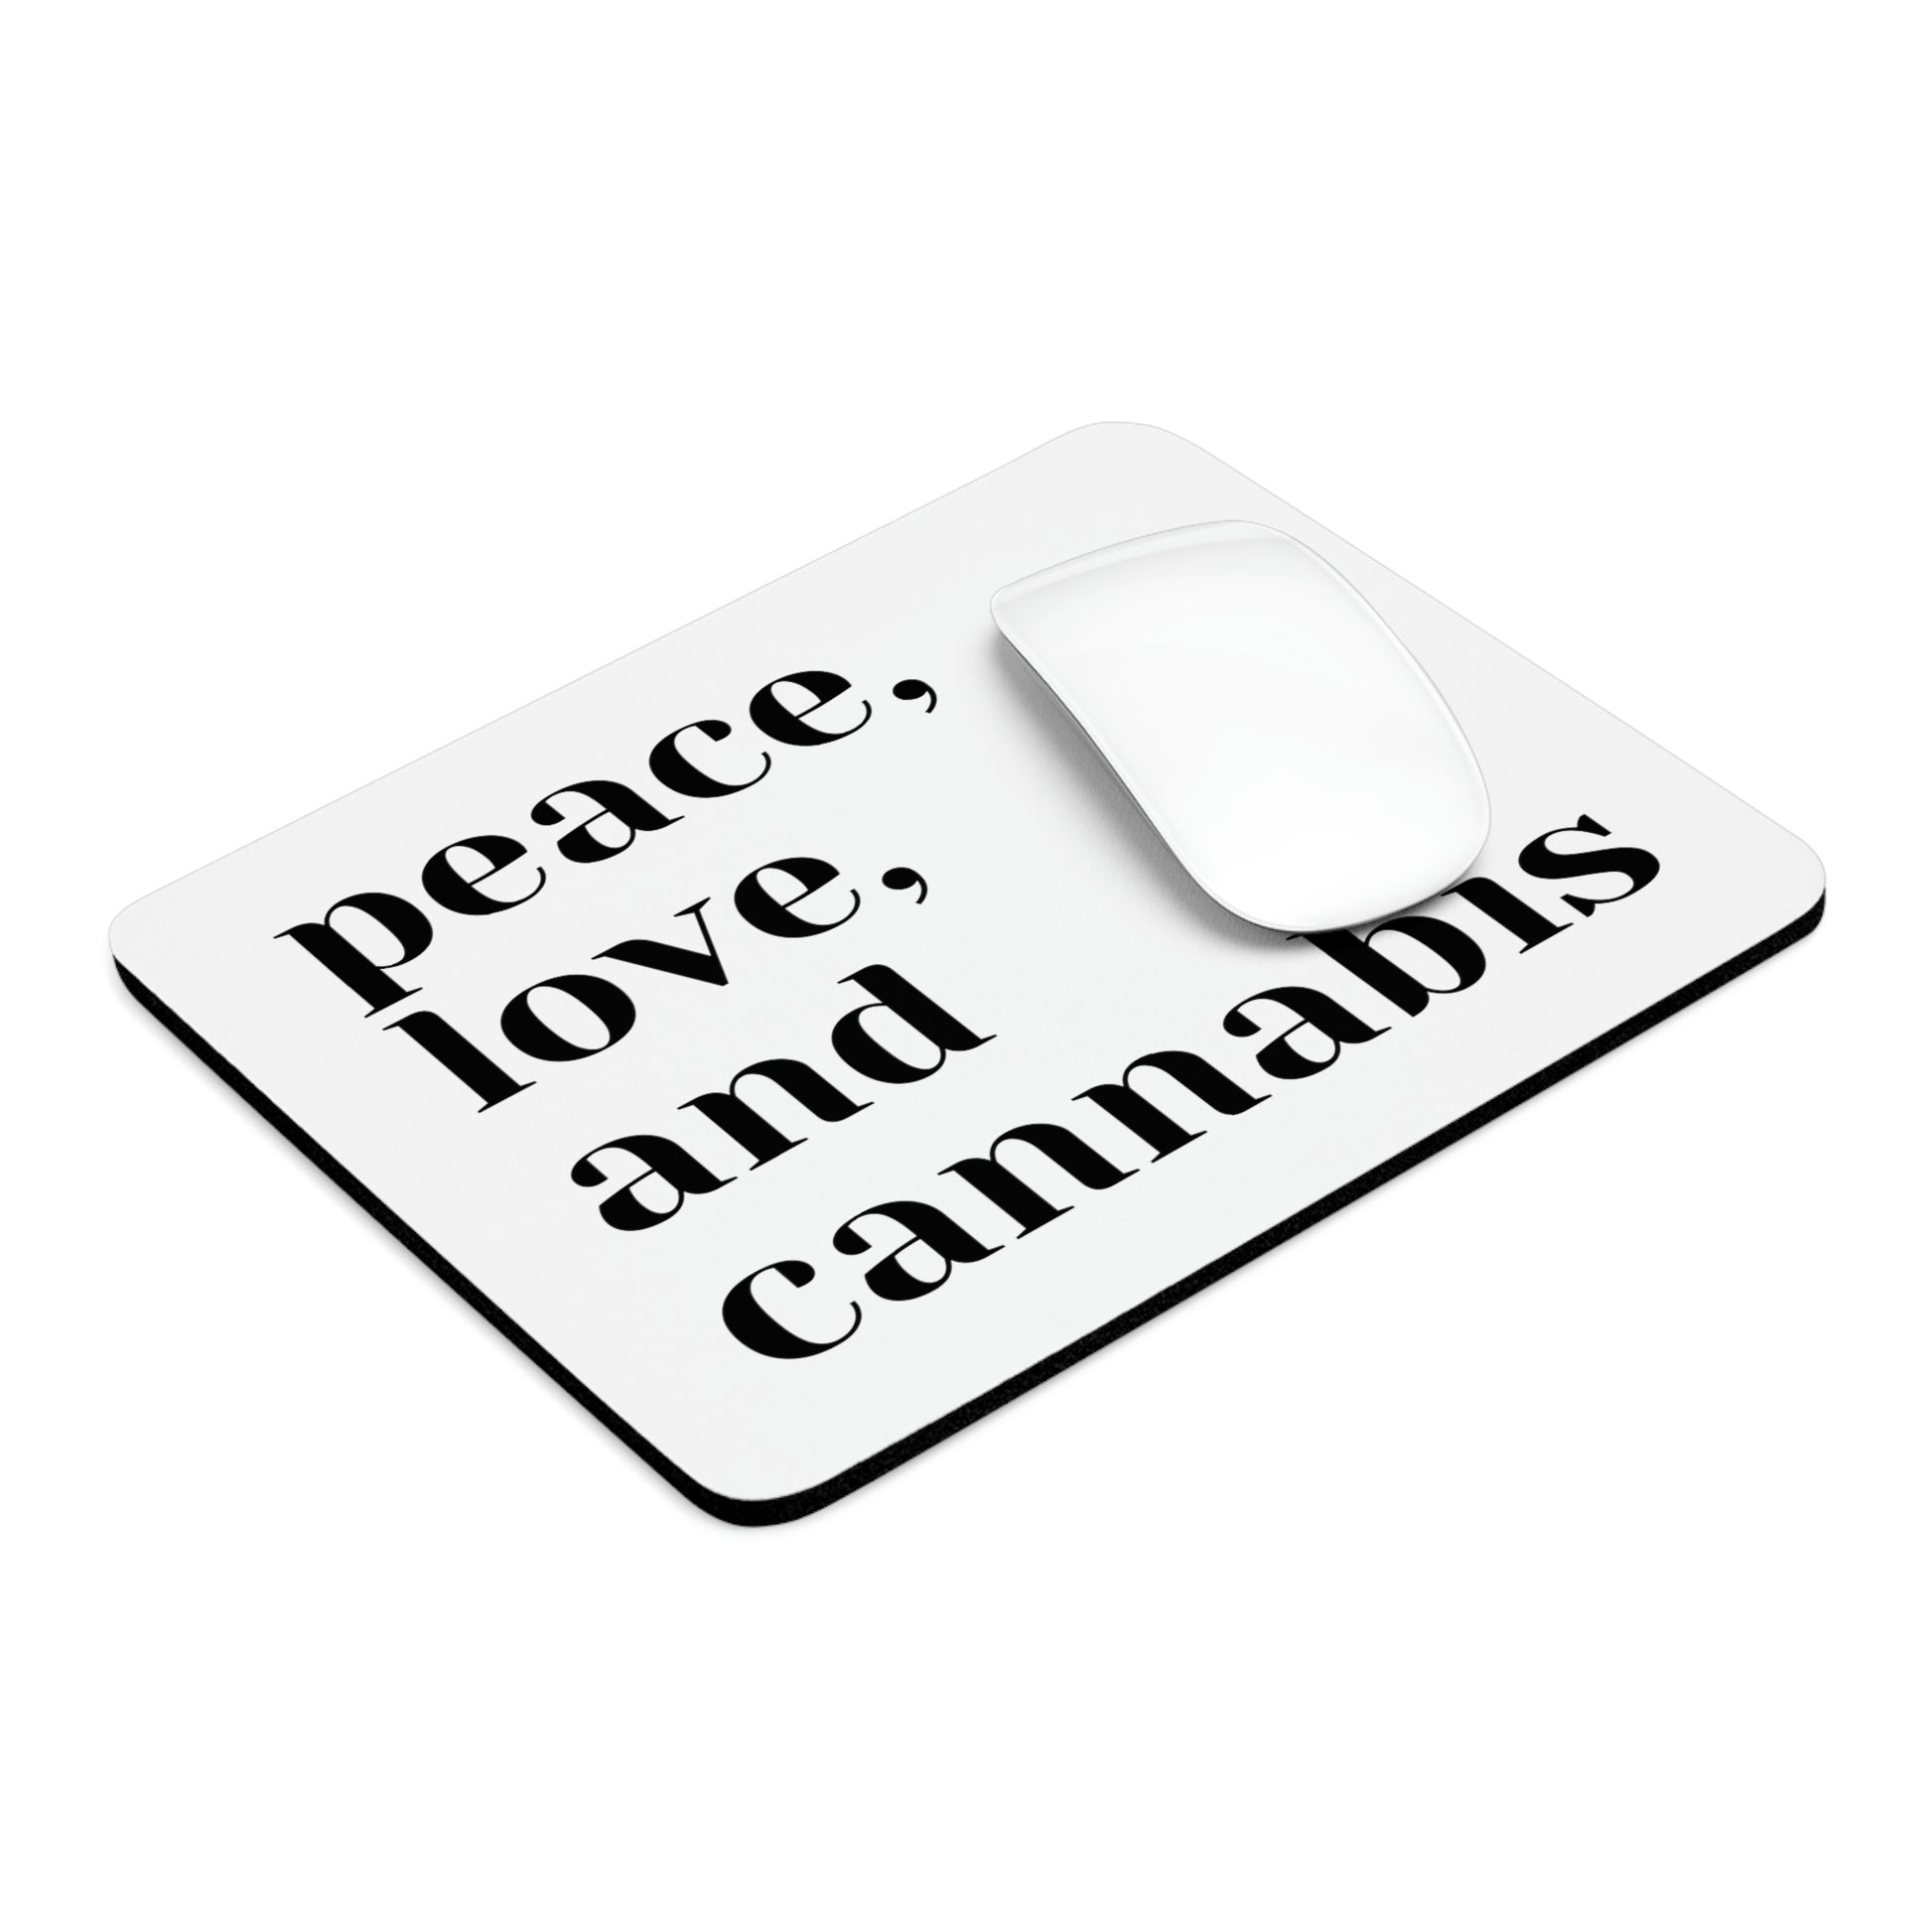 Peace, Love and Cannabis Mouse Pad mouse pad.